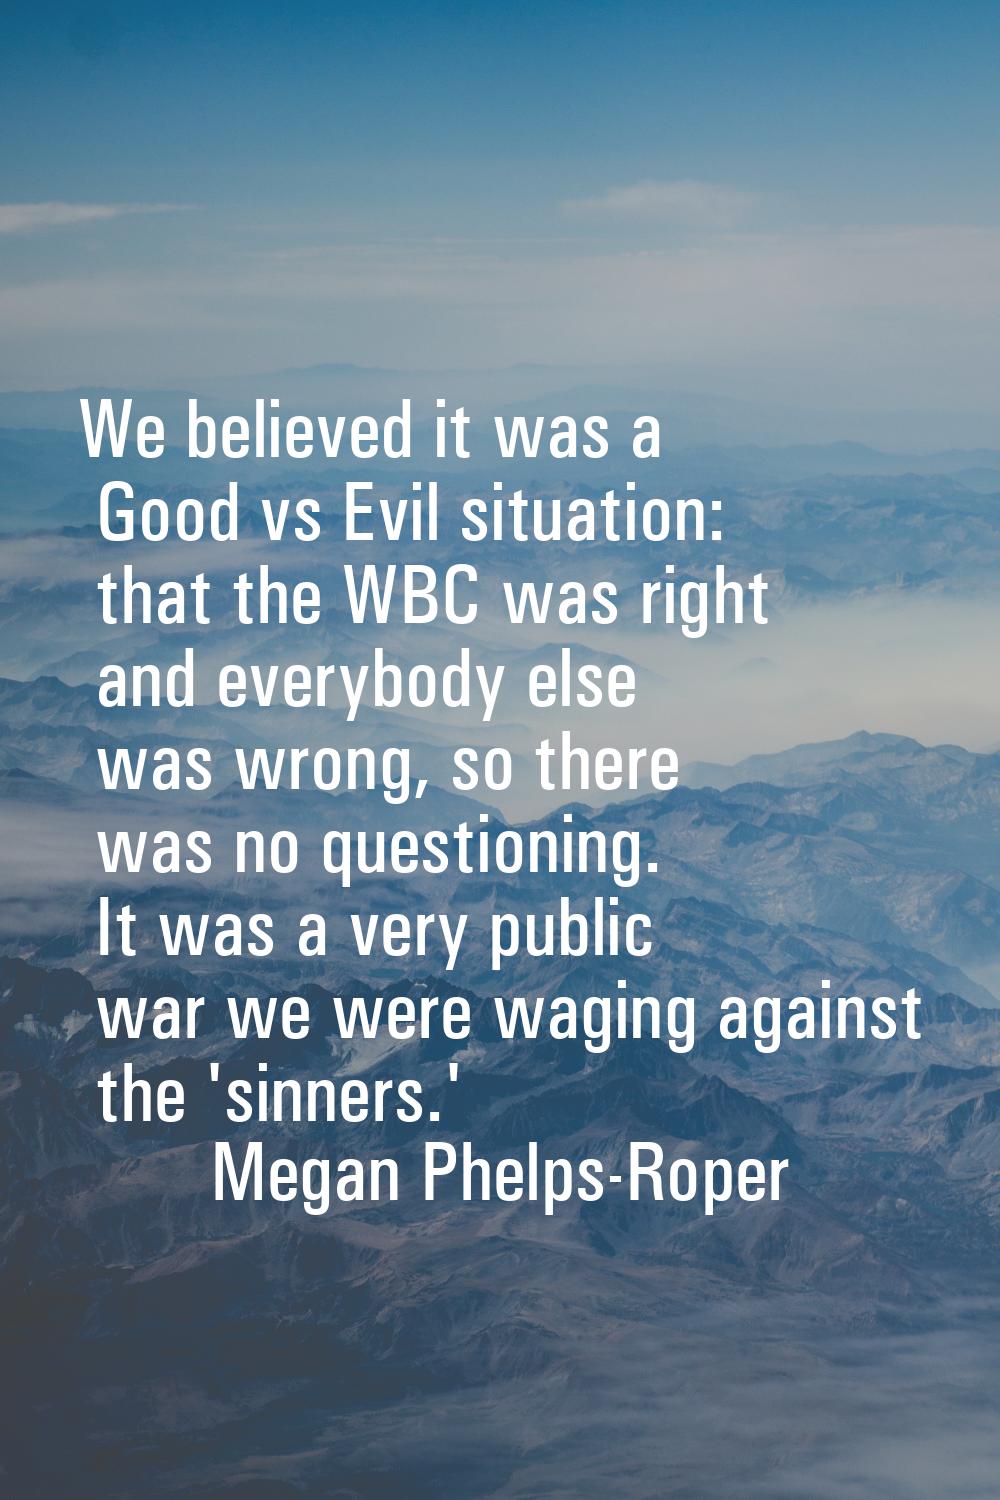 We believed it was a Good vs Evil situation: that the WBC was right and everybody else was wrong, s